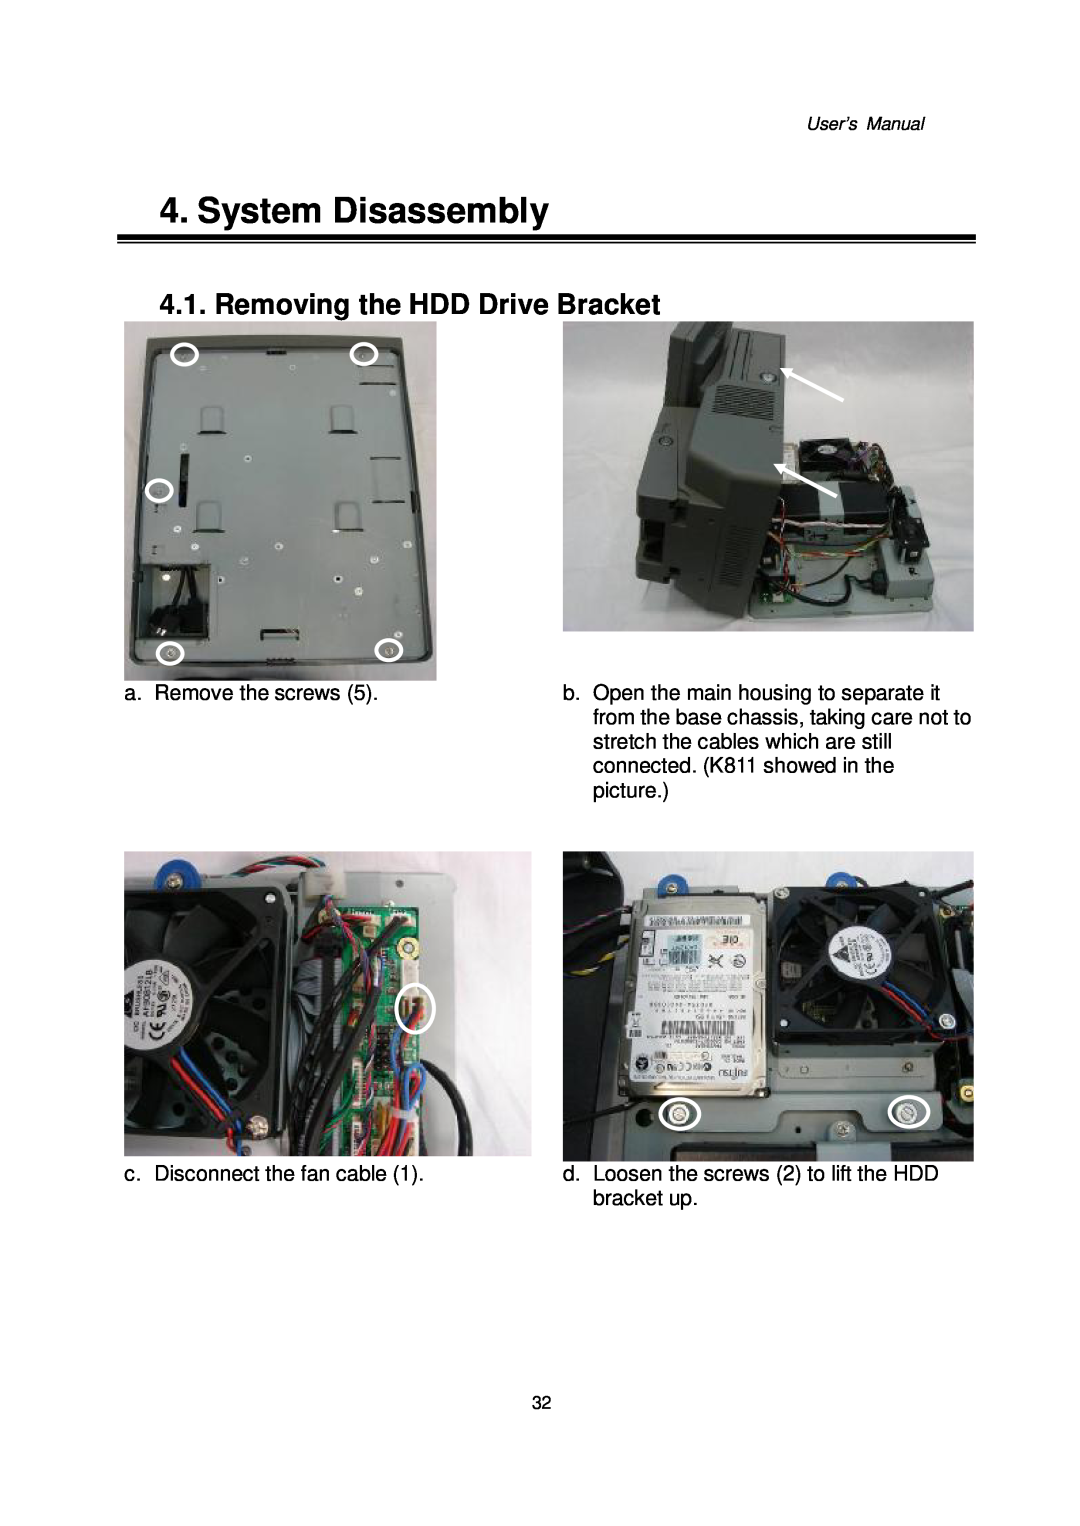 Intel 48201201, Kiosk Hardware System user manual System Disassembly, Removing the HDD Drive Bracket, User’s Manual 